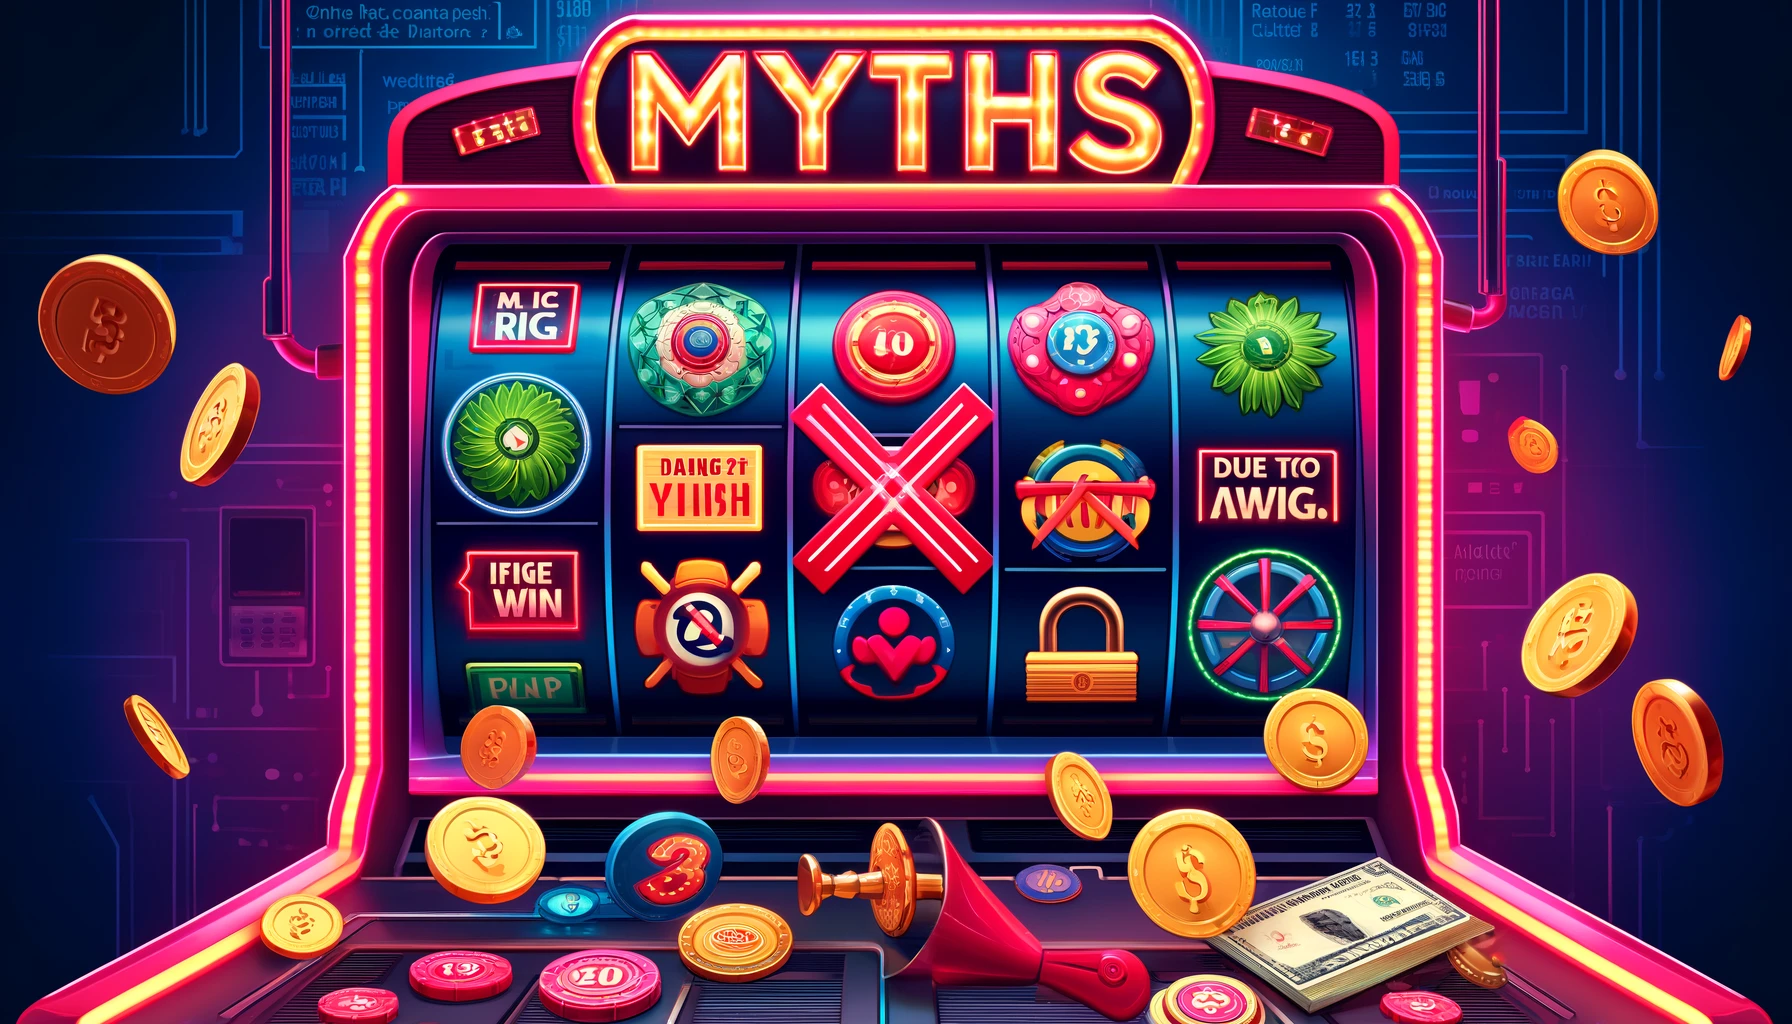 The image has been created to visually depict the debunking of common myths about online slots.